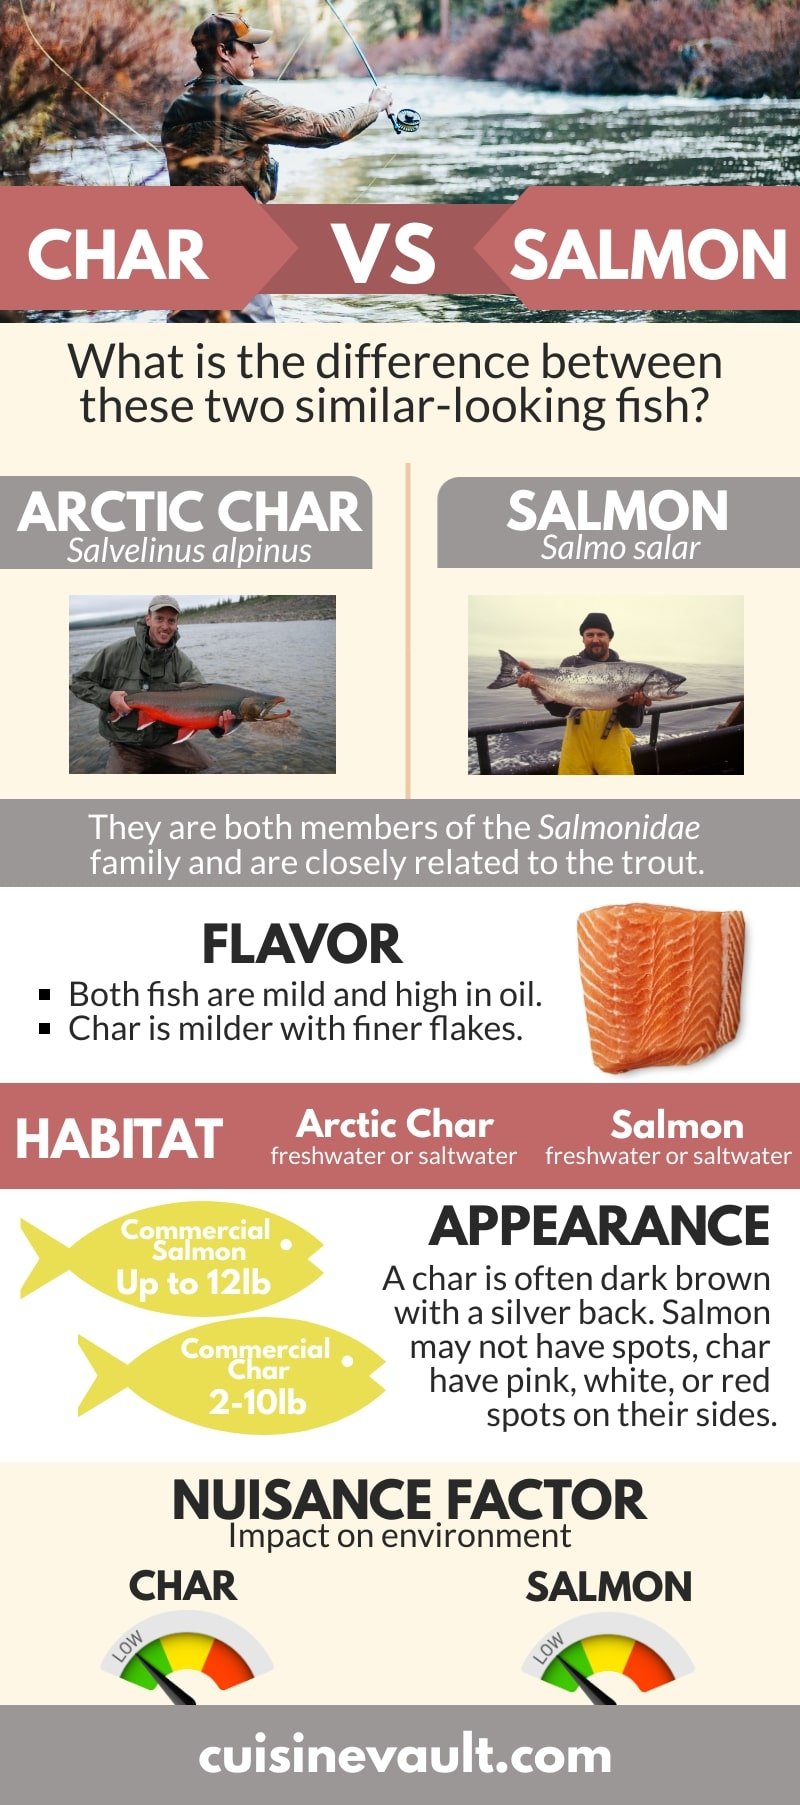 An infographic comparing the arctic char and salmon